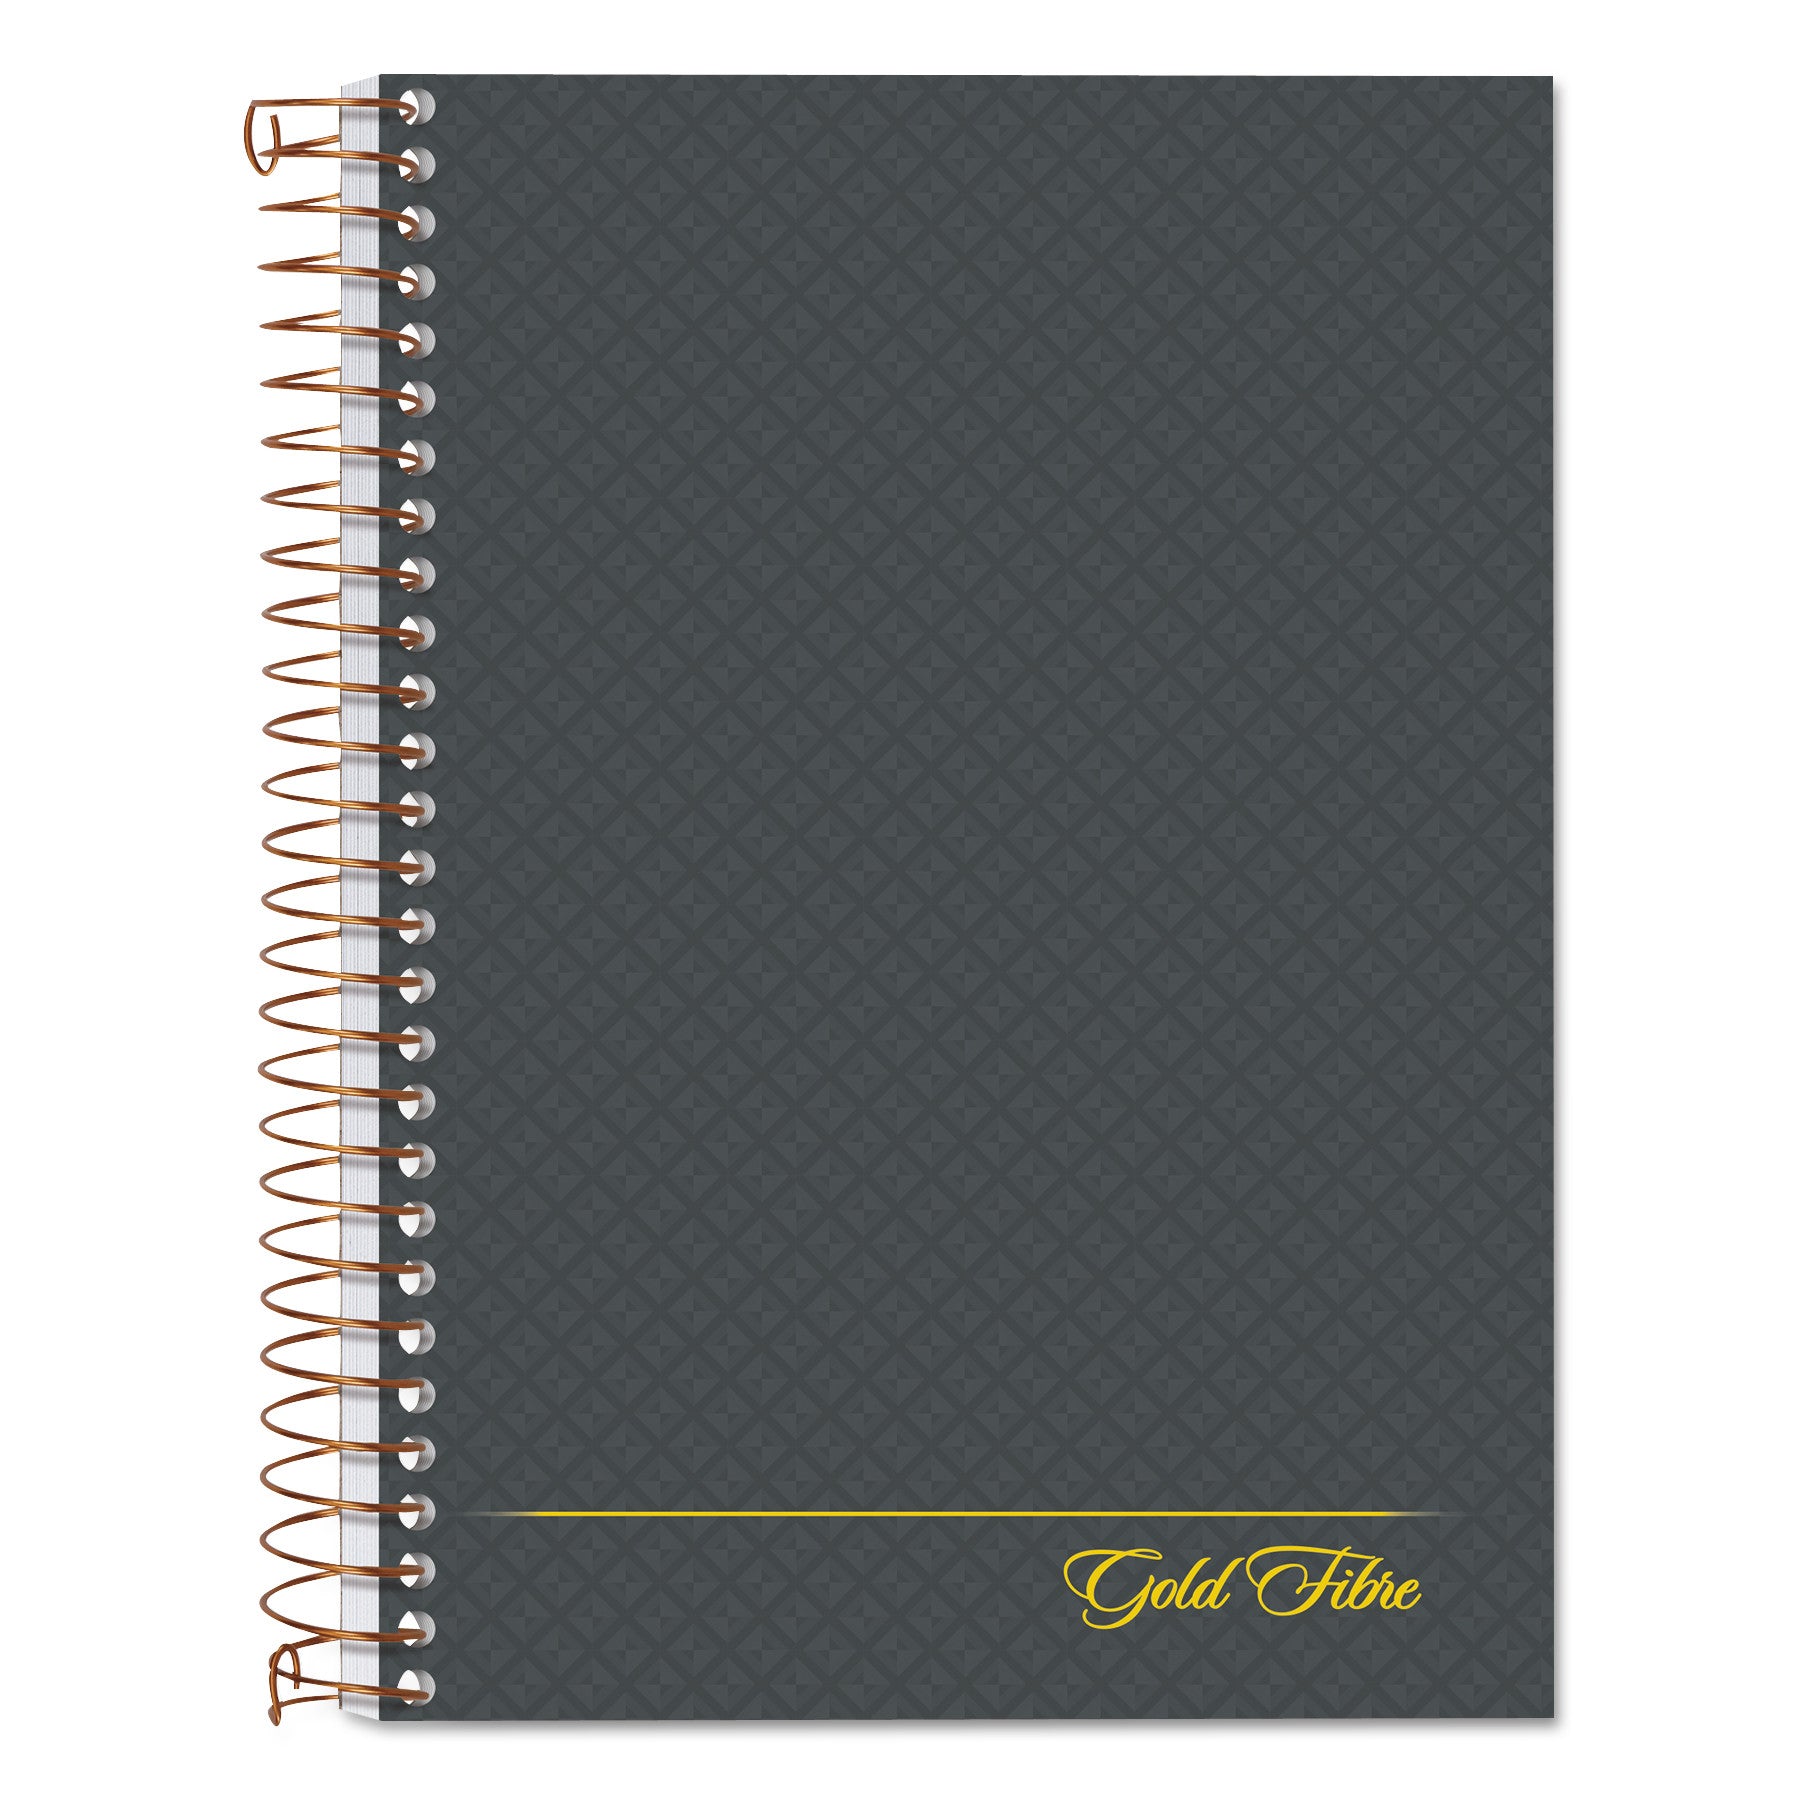 Gold Fibre Personal Notebooks, 1-Subject, Medium/College Rule, Designer Gray Cover, (100) 7 x 5 Sheets - 